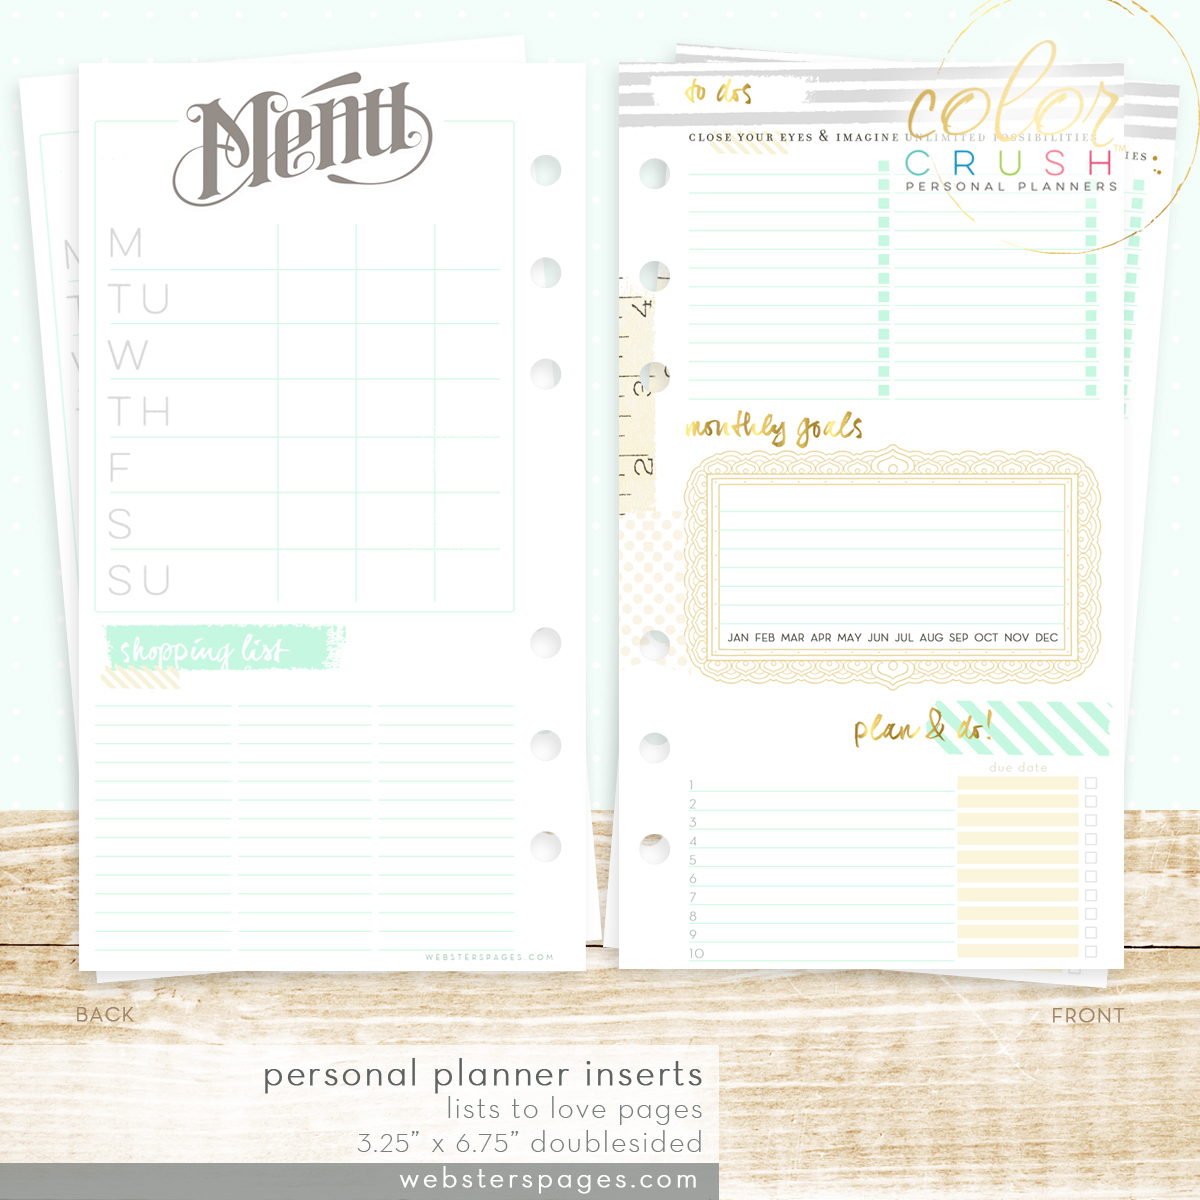 Планер PERSONAL PLANNER KIT : Light Teal by Websters Pages